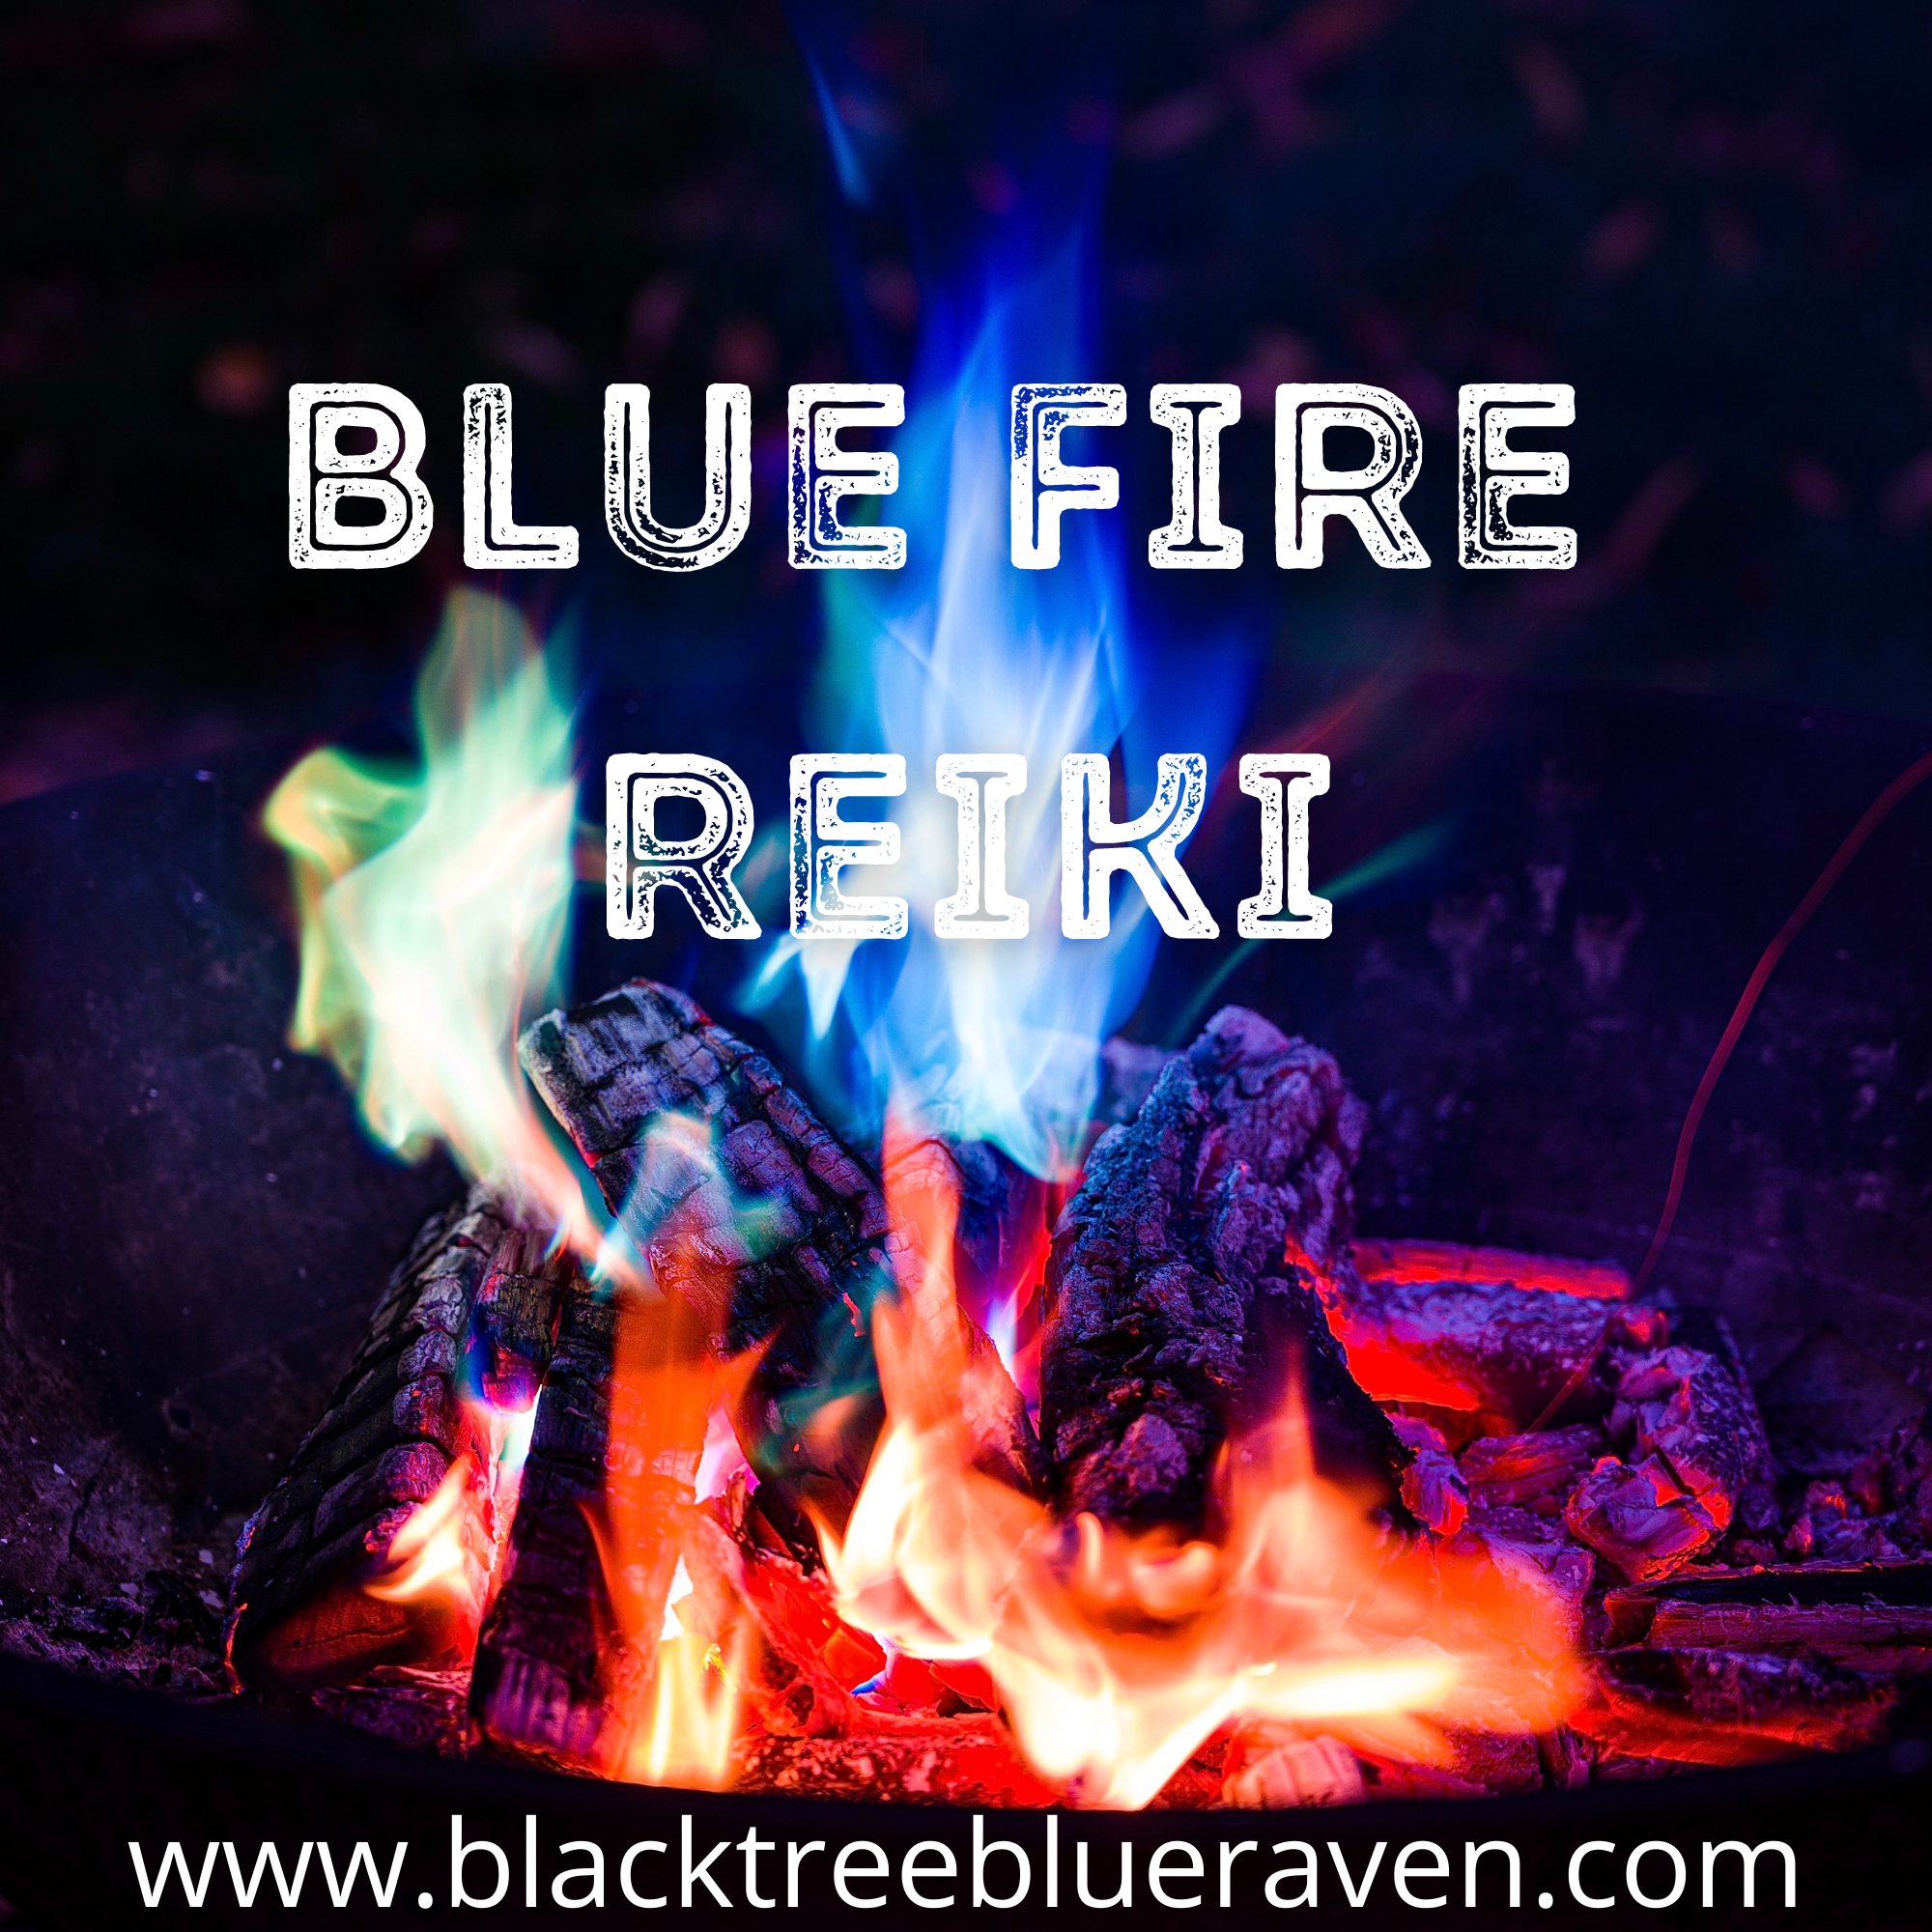 Forever Reiki! Purple Fire, Blue Fire or Traditional Gentle Reiki Restore Vitality Youth Psychic Abilities and Release DMT OBE Development Third Eye